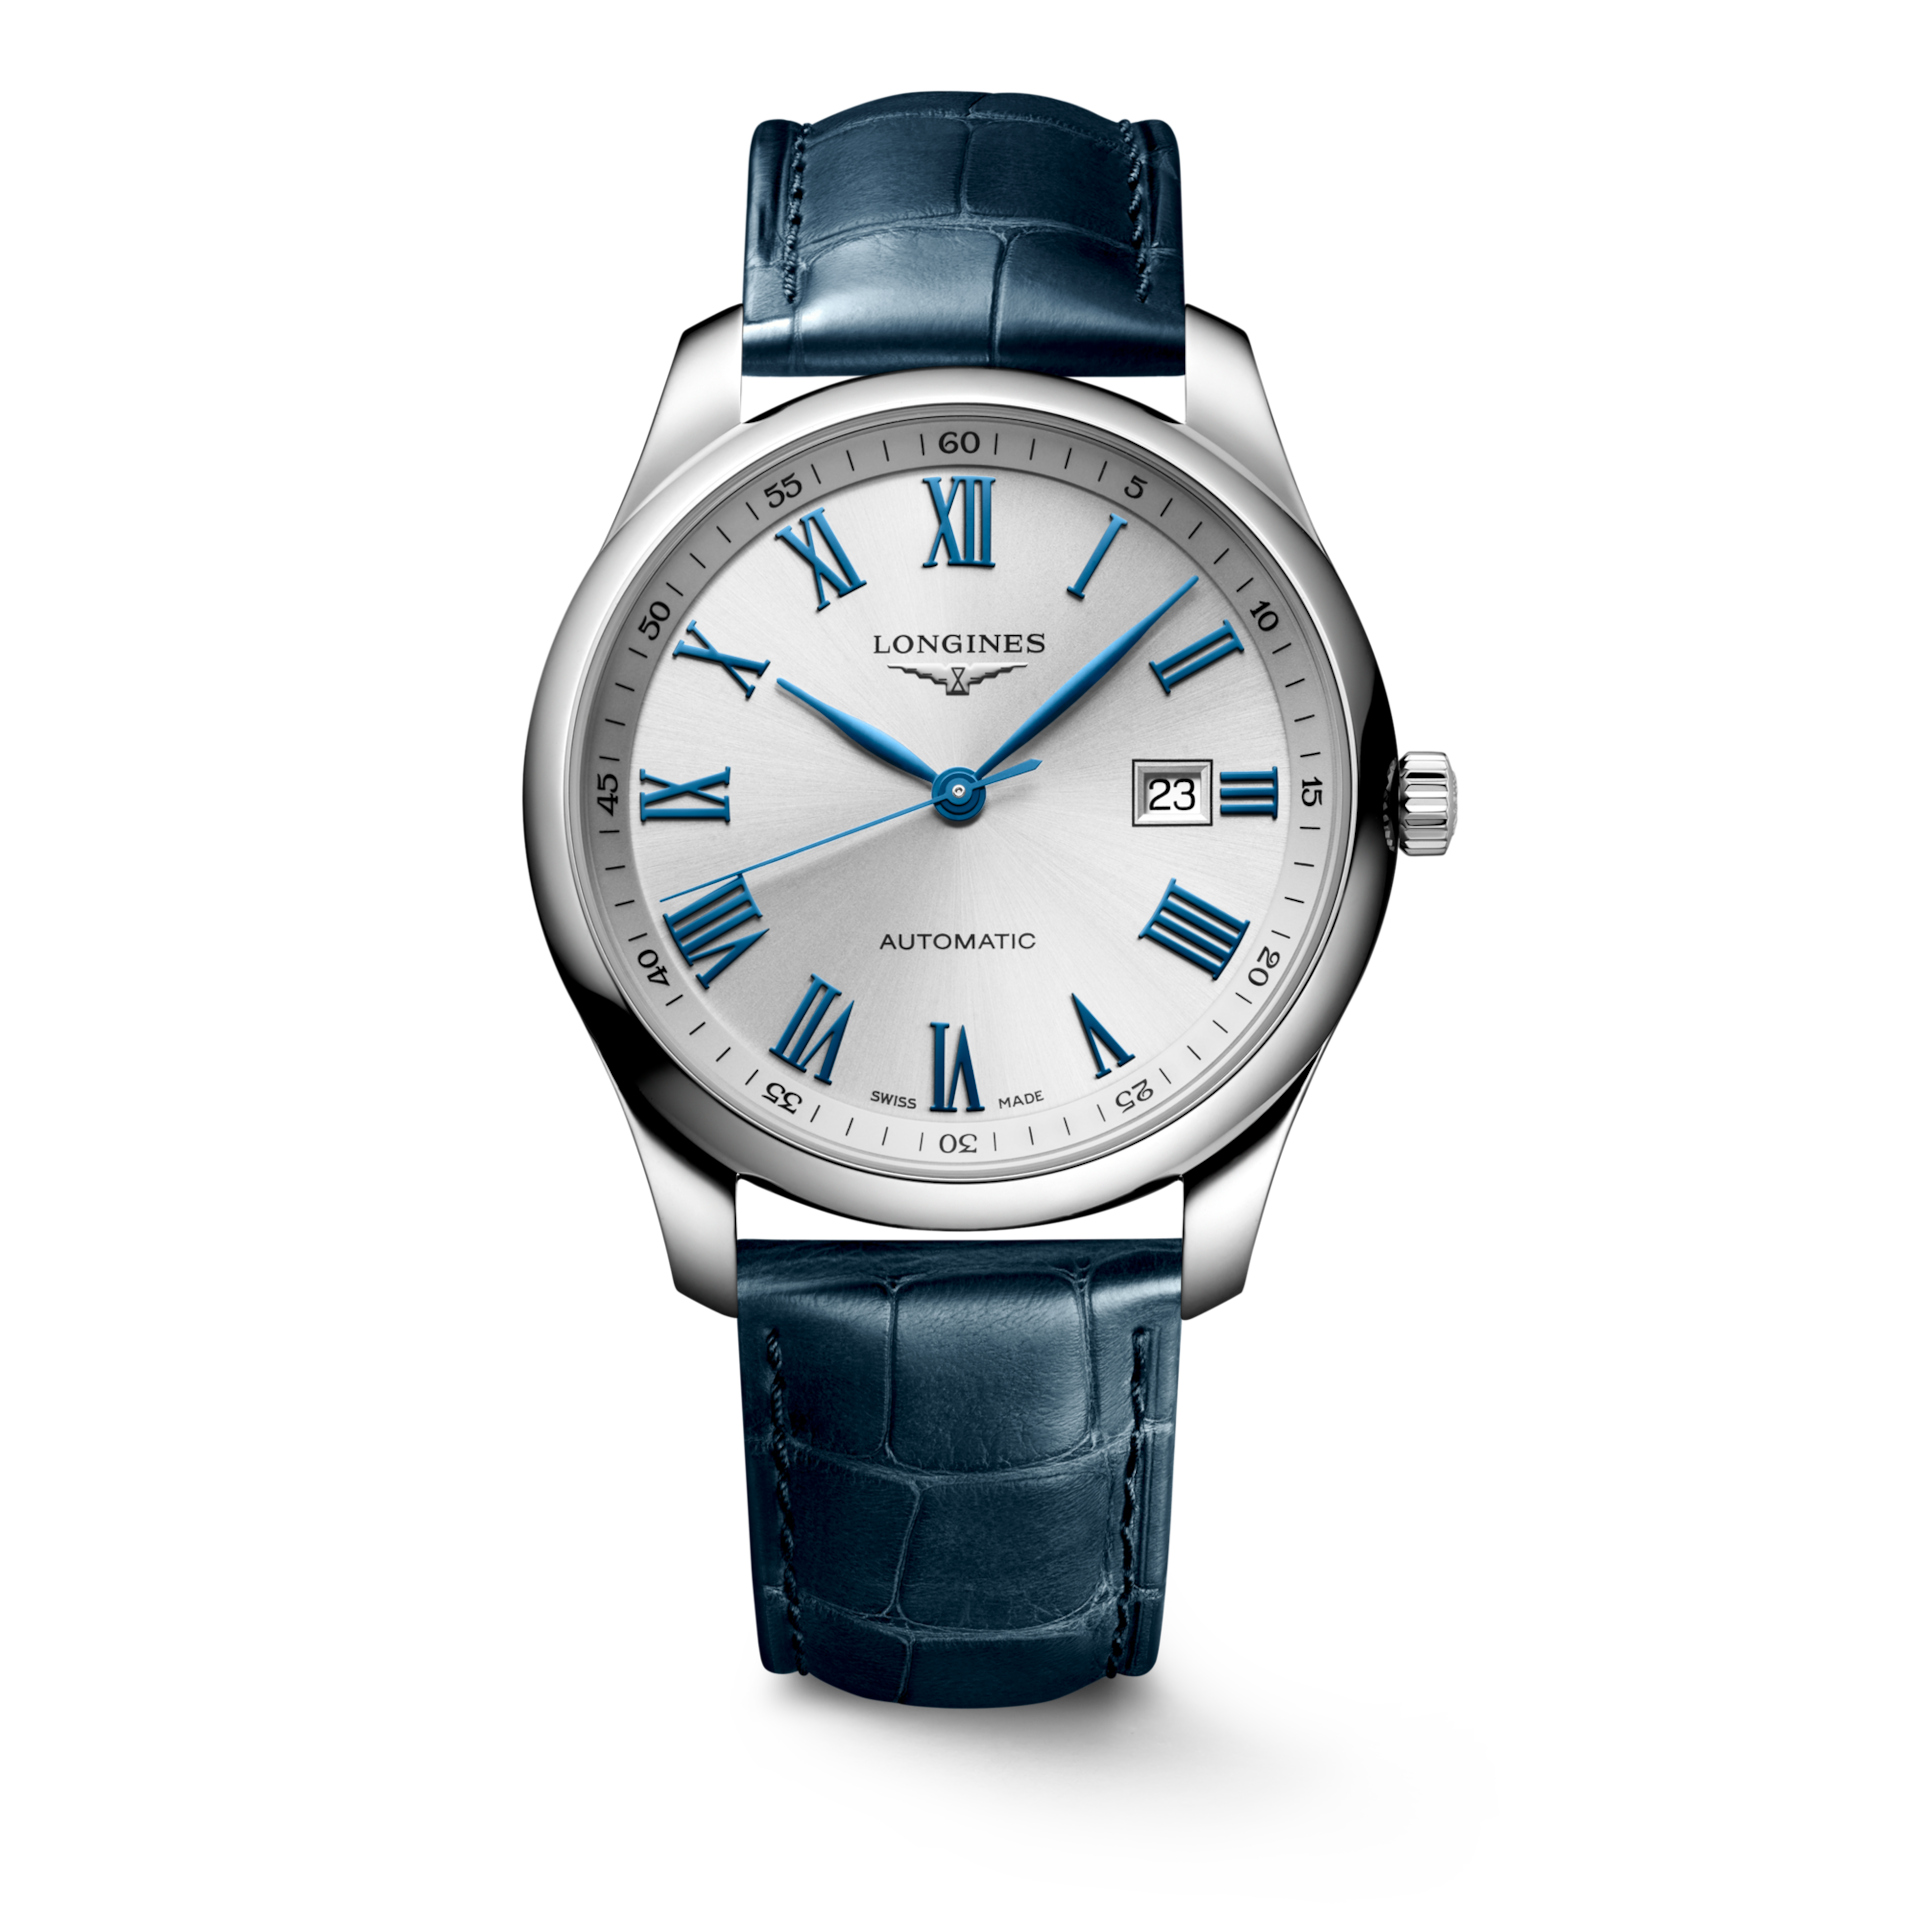 THE LONGINES MASTER COLLECTION L2.893.4.79.2